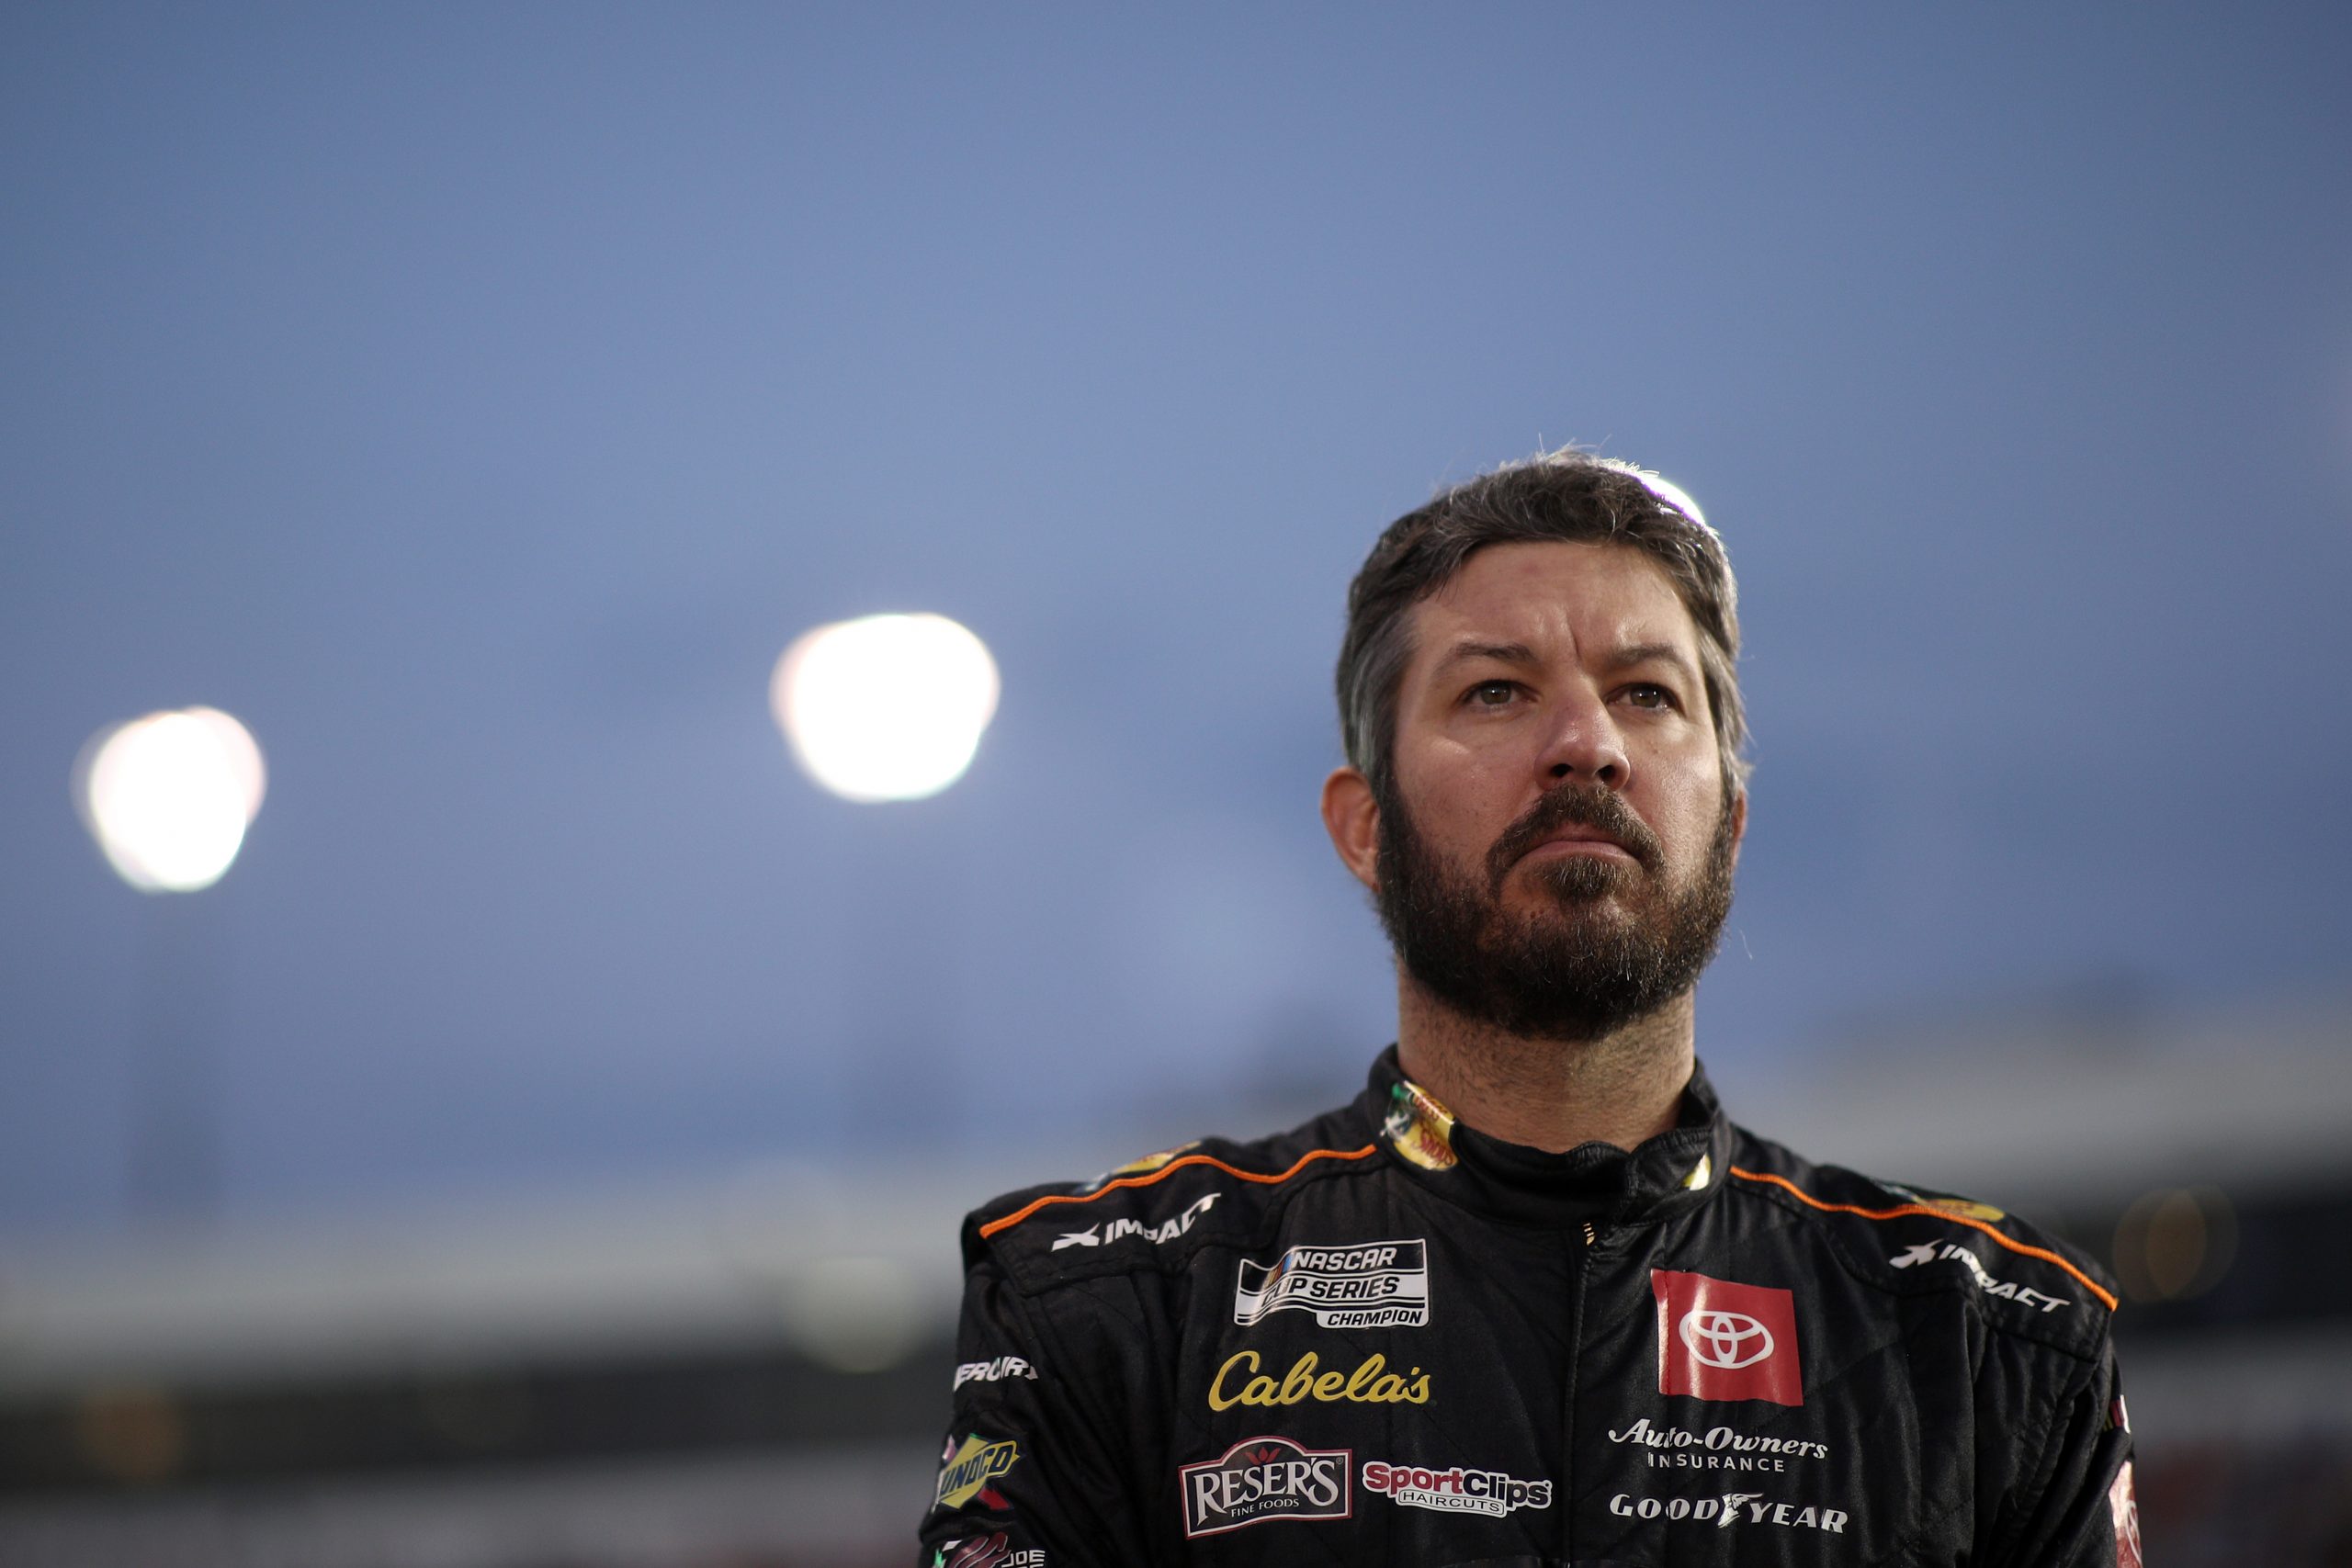 Martin Truex Jr., driver of the No. 19 Toyota, stands on the grid during the national anthem prior to the NASCAR Cup Series Federated Auto Parts 400 Salute to First Responders at Richmond Raceway on Sept. 11, 2021.